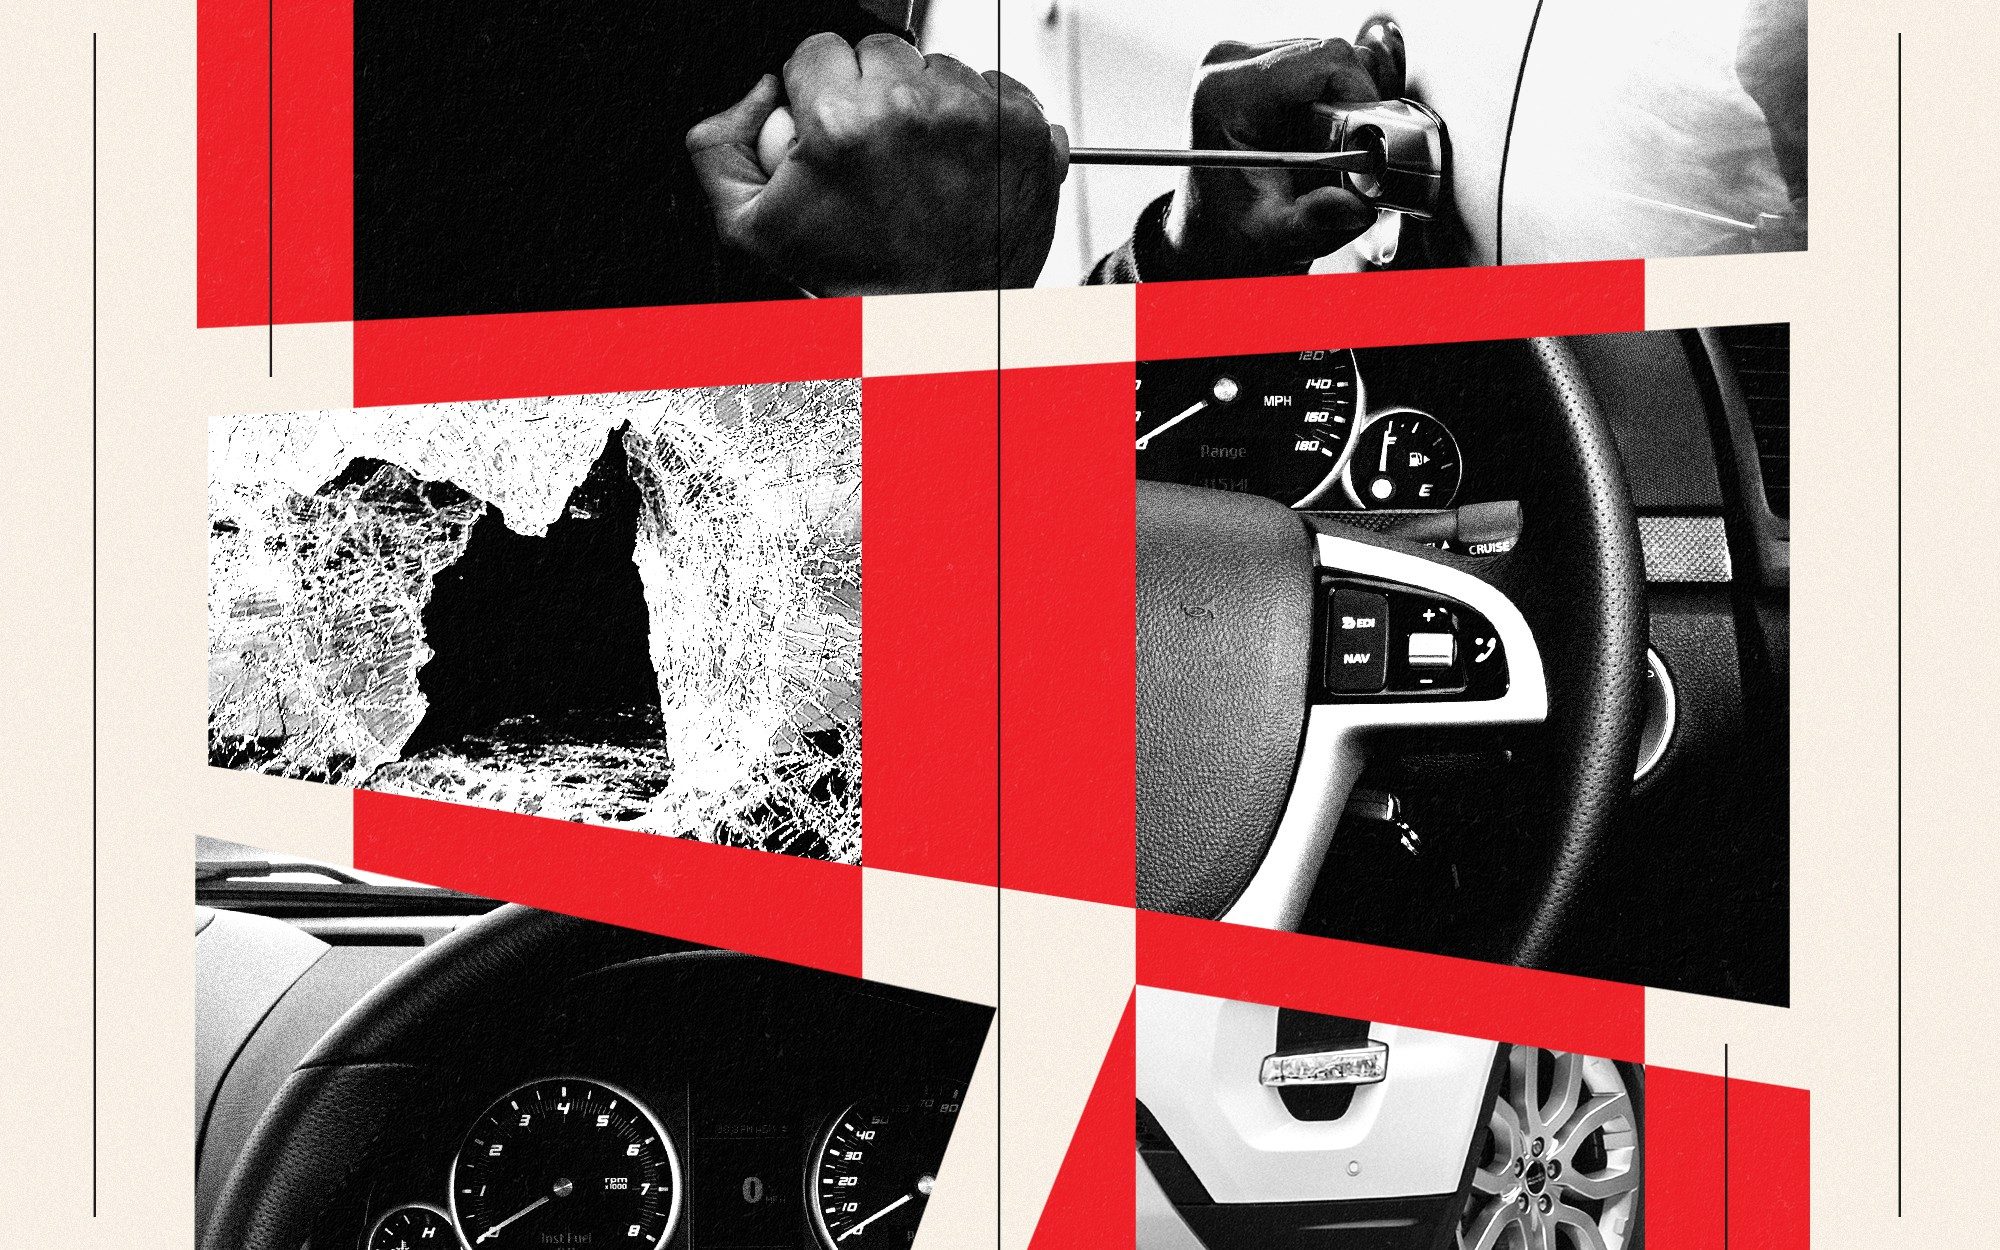 why your car has never been so at risk from theft – and what you can do about it